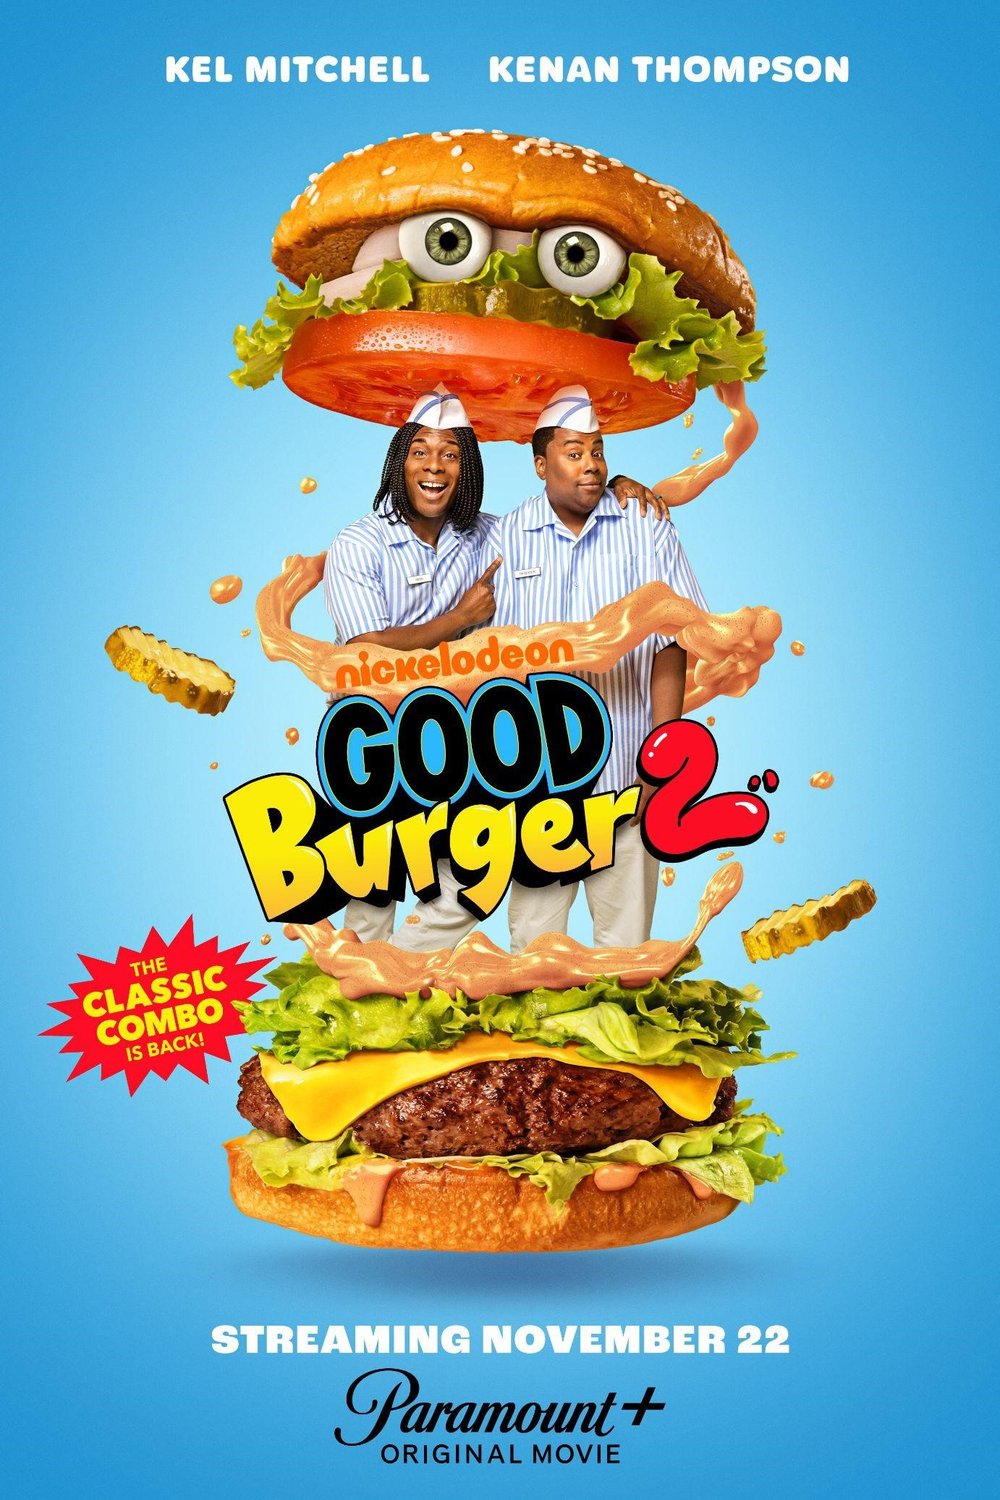 Poster of the movie Good Burger 2